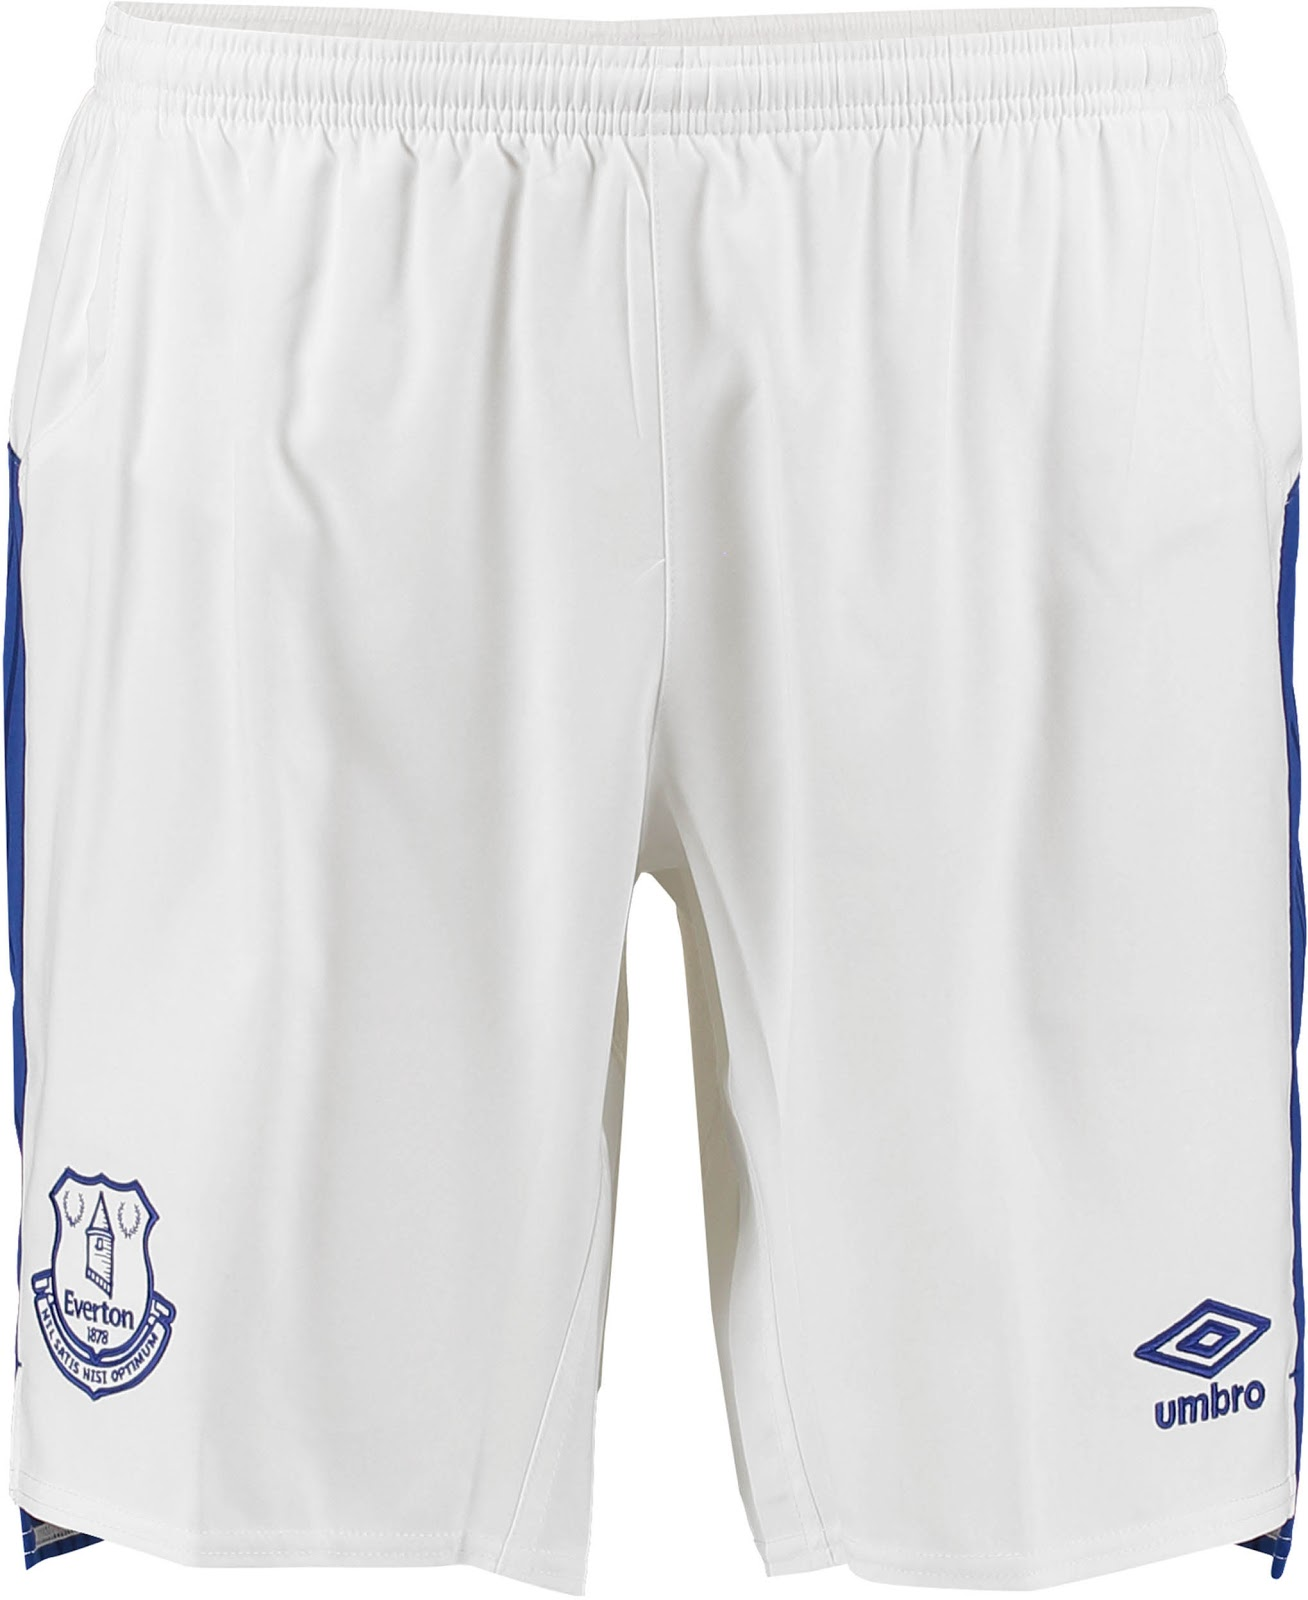 60x Everton Kids Umbro Football Shorts RRP £15 Only 50p each